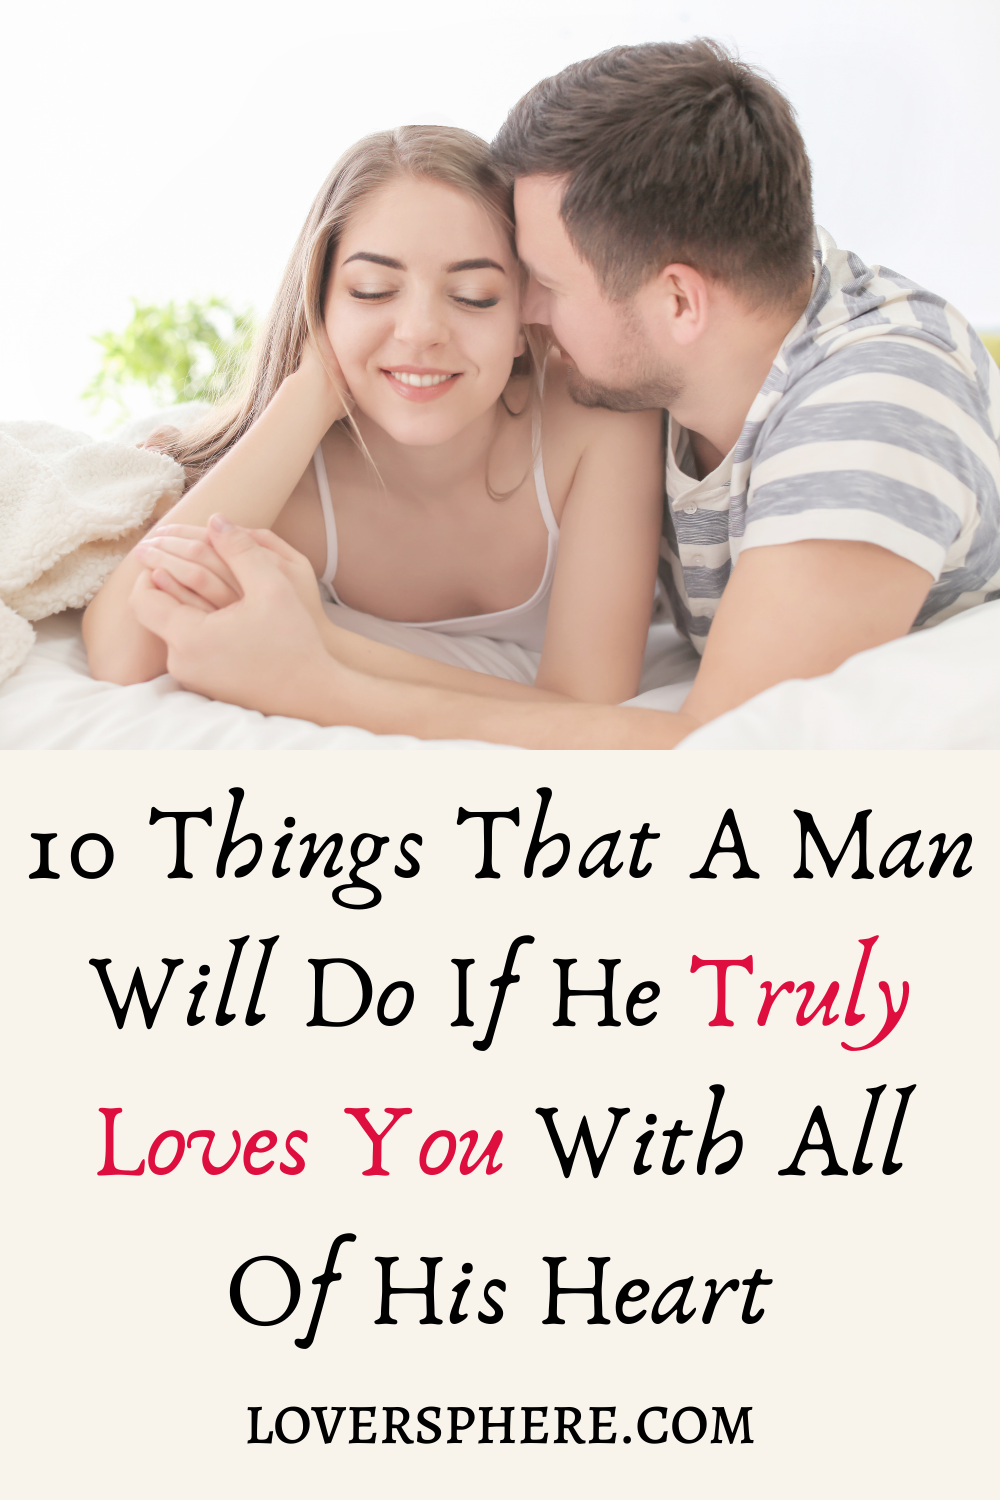 Things That A Man Will Do If He Truly Loves You With All Of His Heart